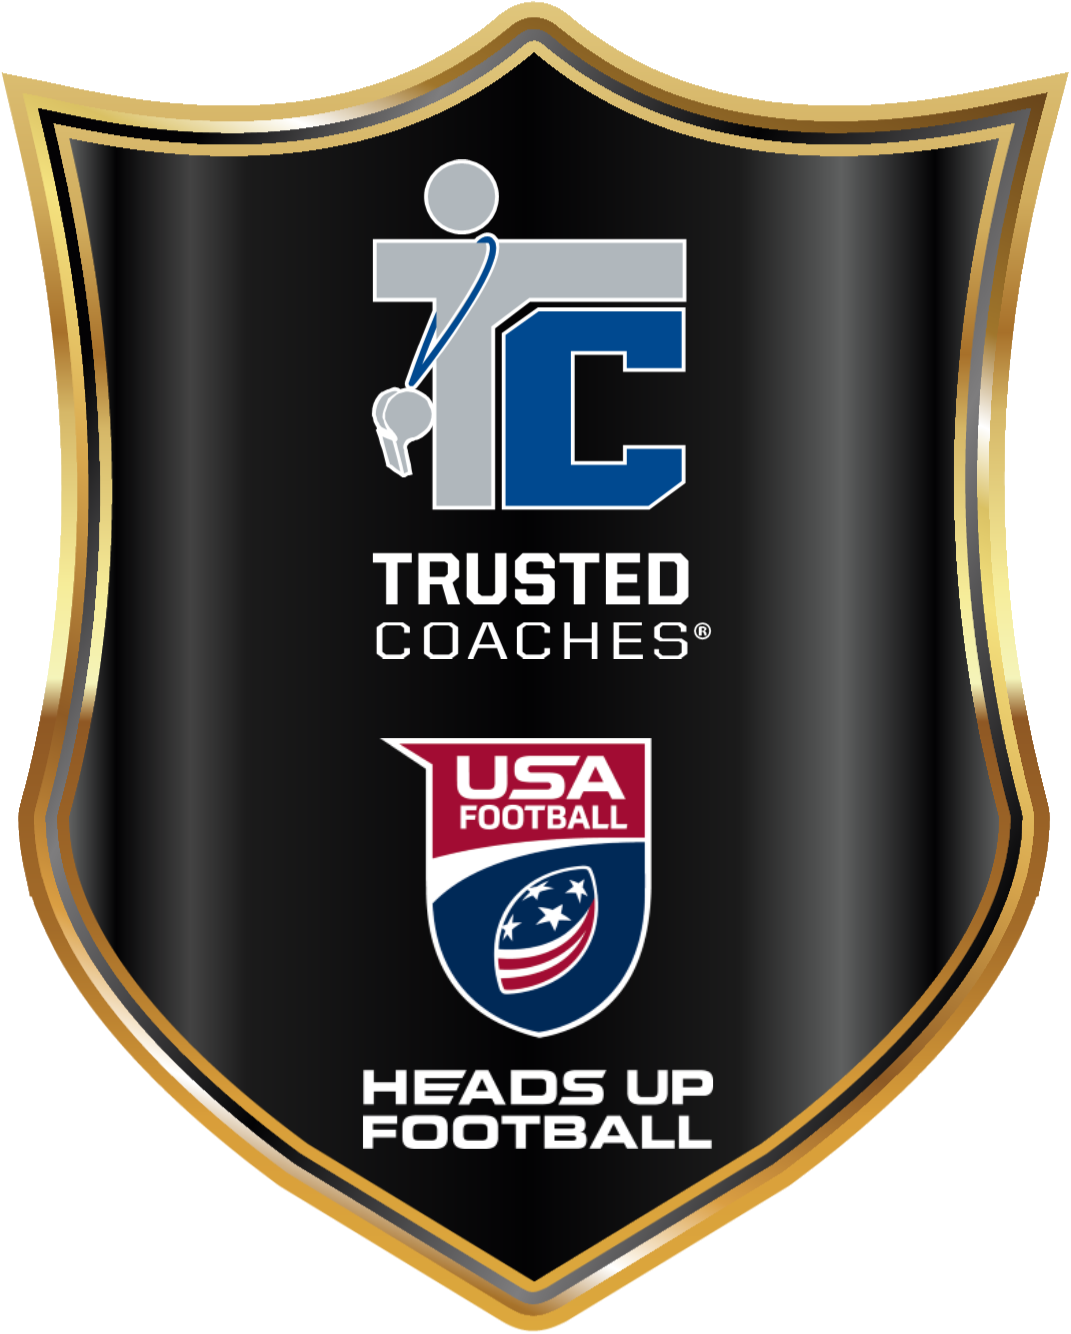 Trusted Coaches U S A Football Heads Up Logo PNG